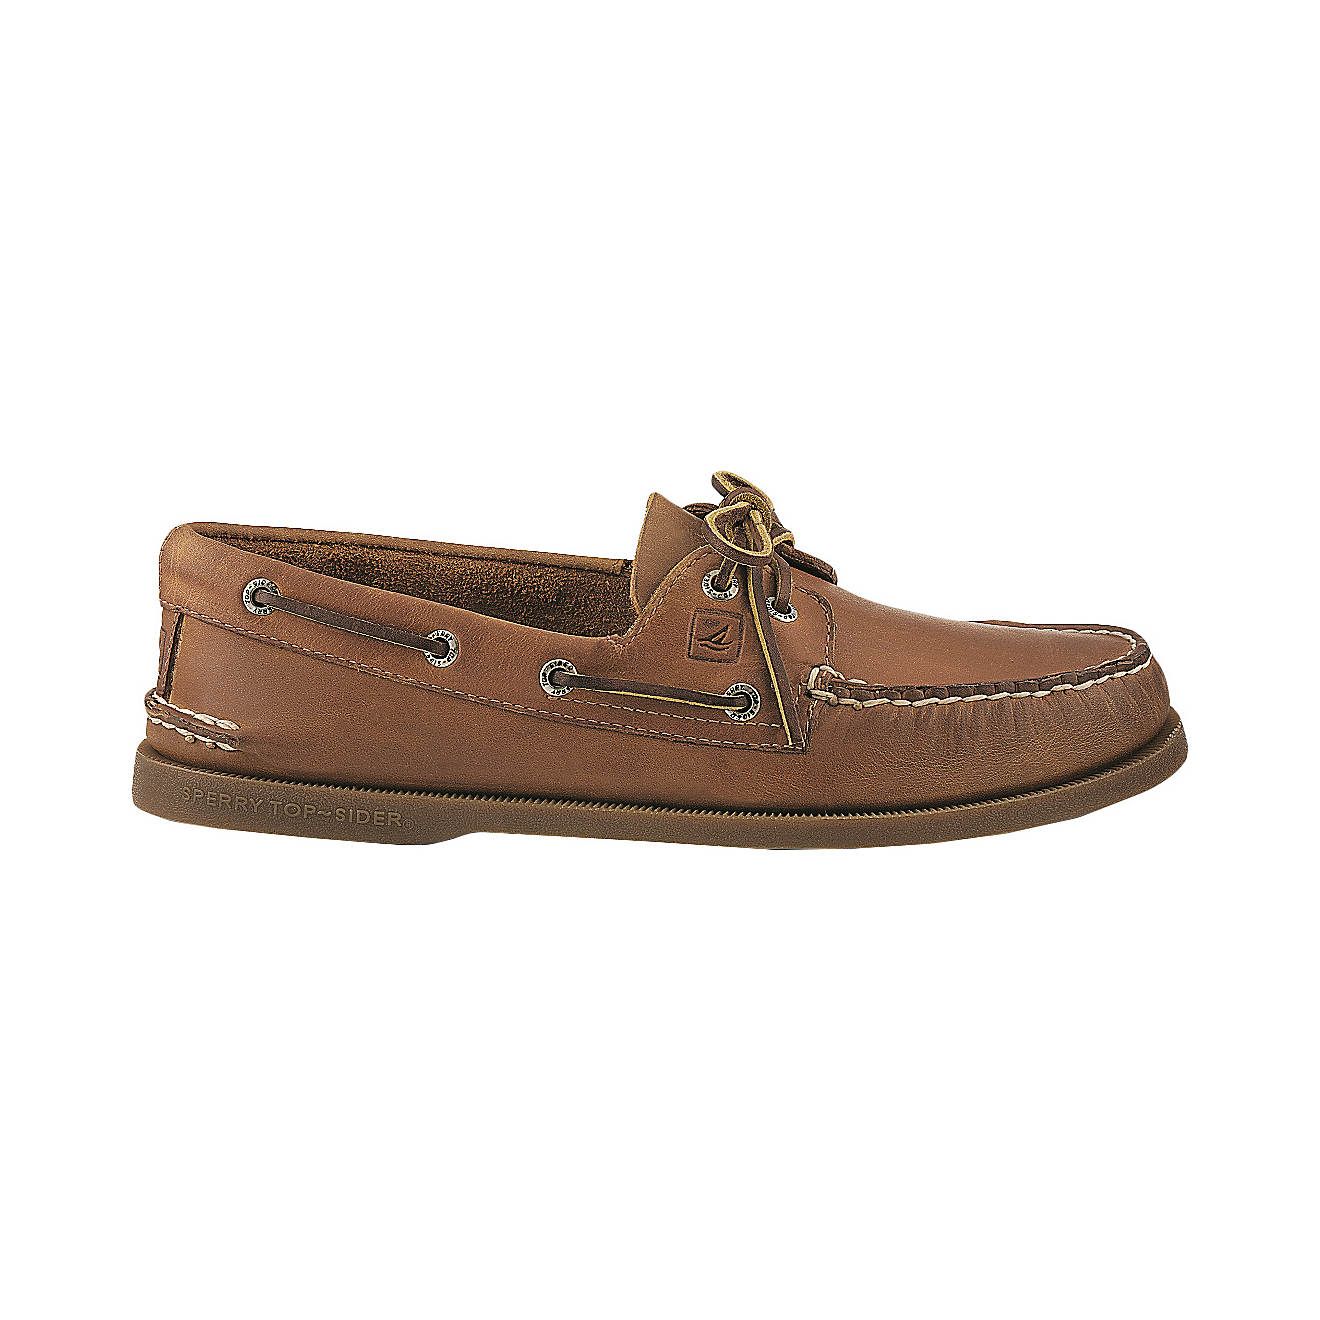 Sperry Men's Authentic Original Boat Shoes | Academy | Academy Sports + Outdoors